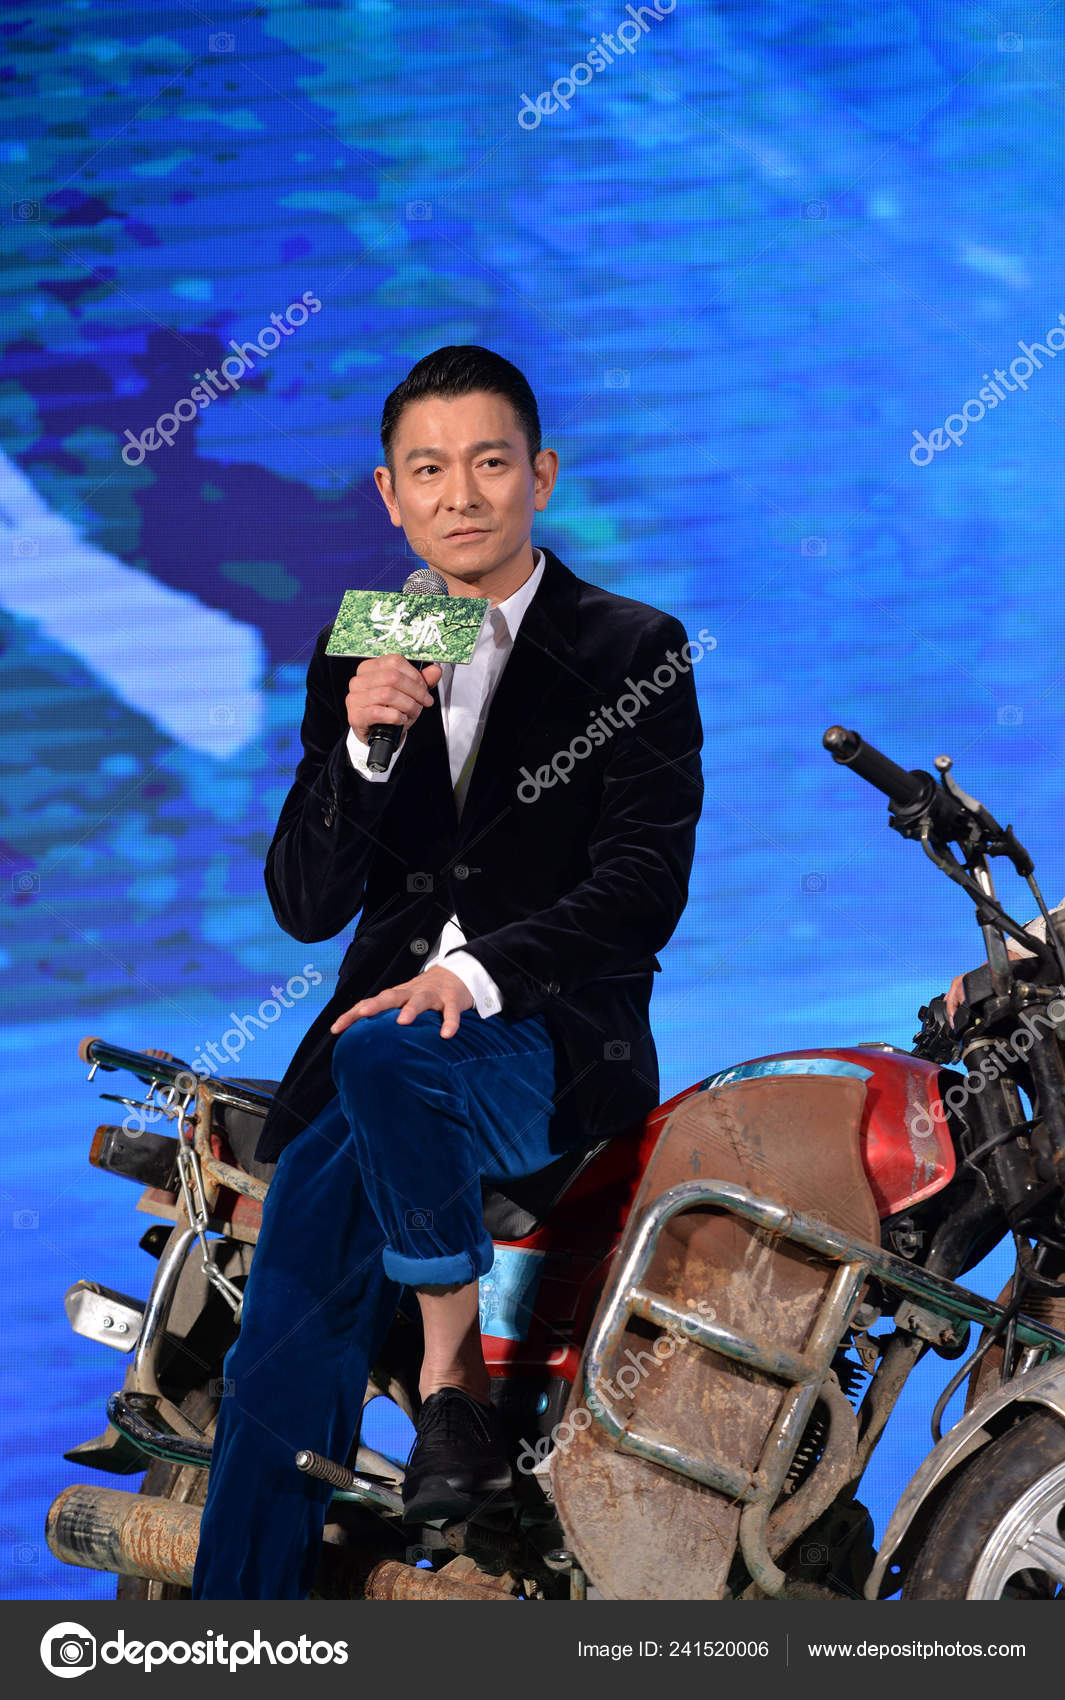 Andy lau movie lost and love